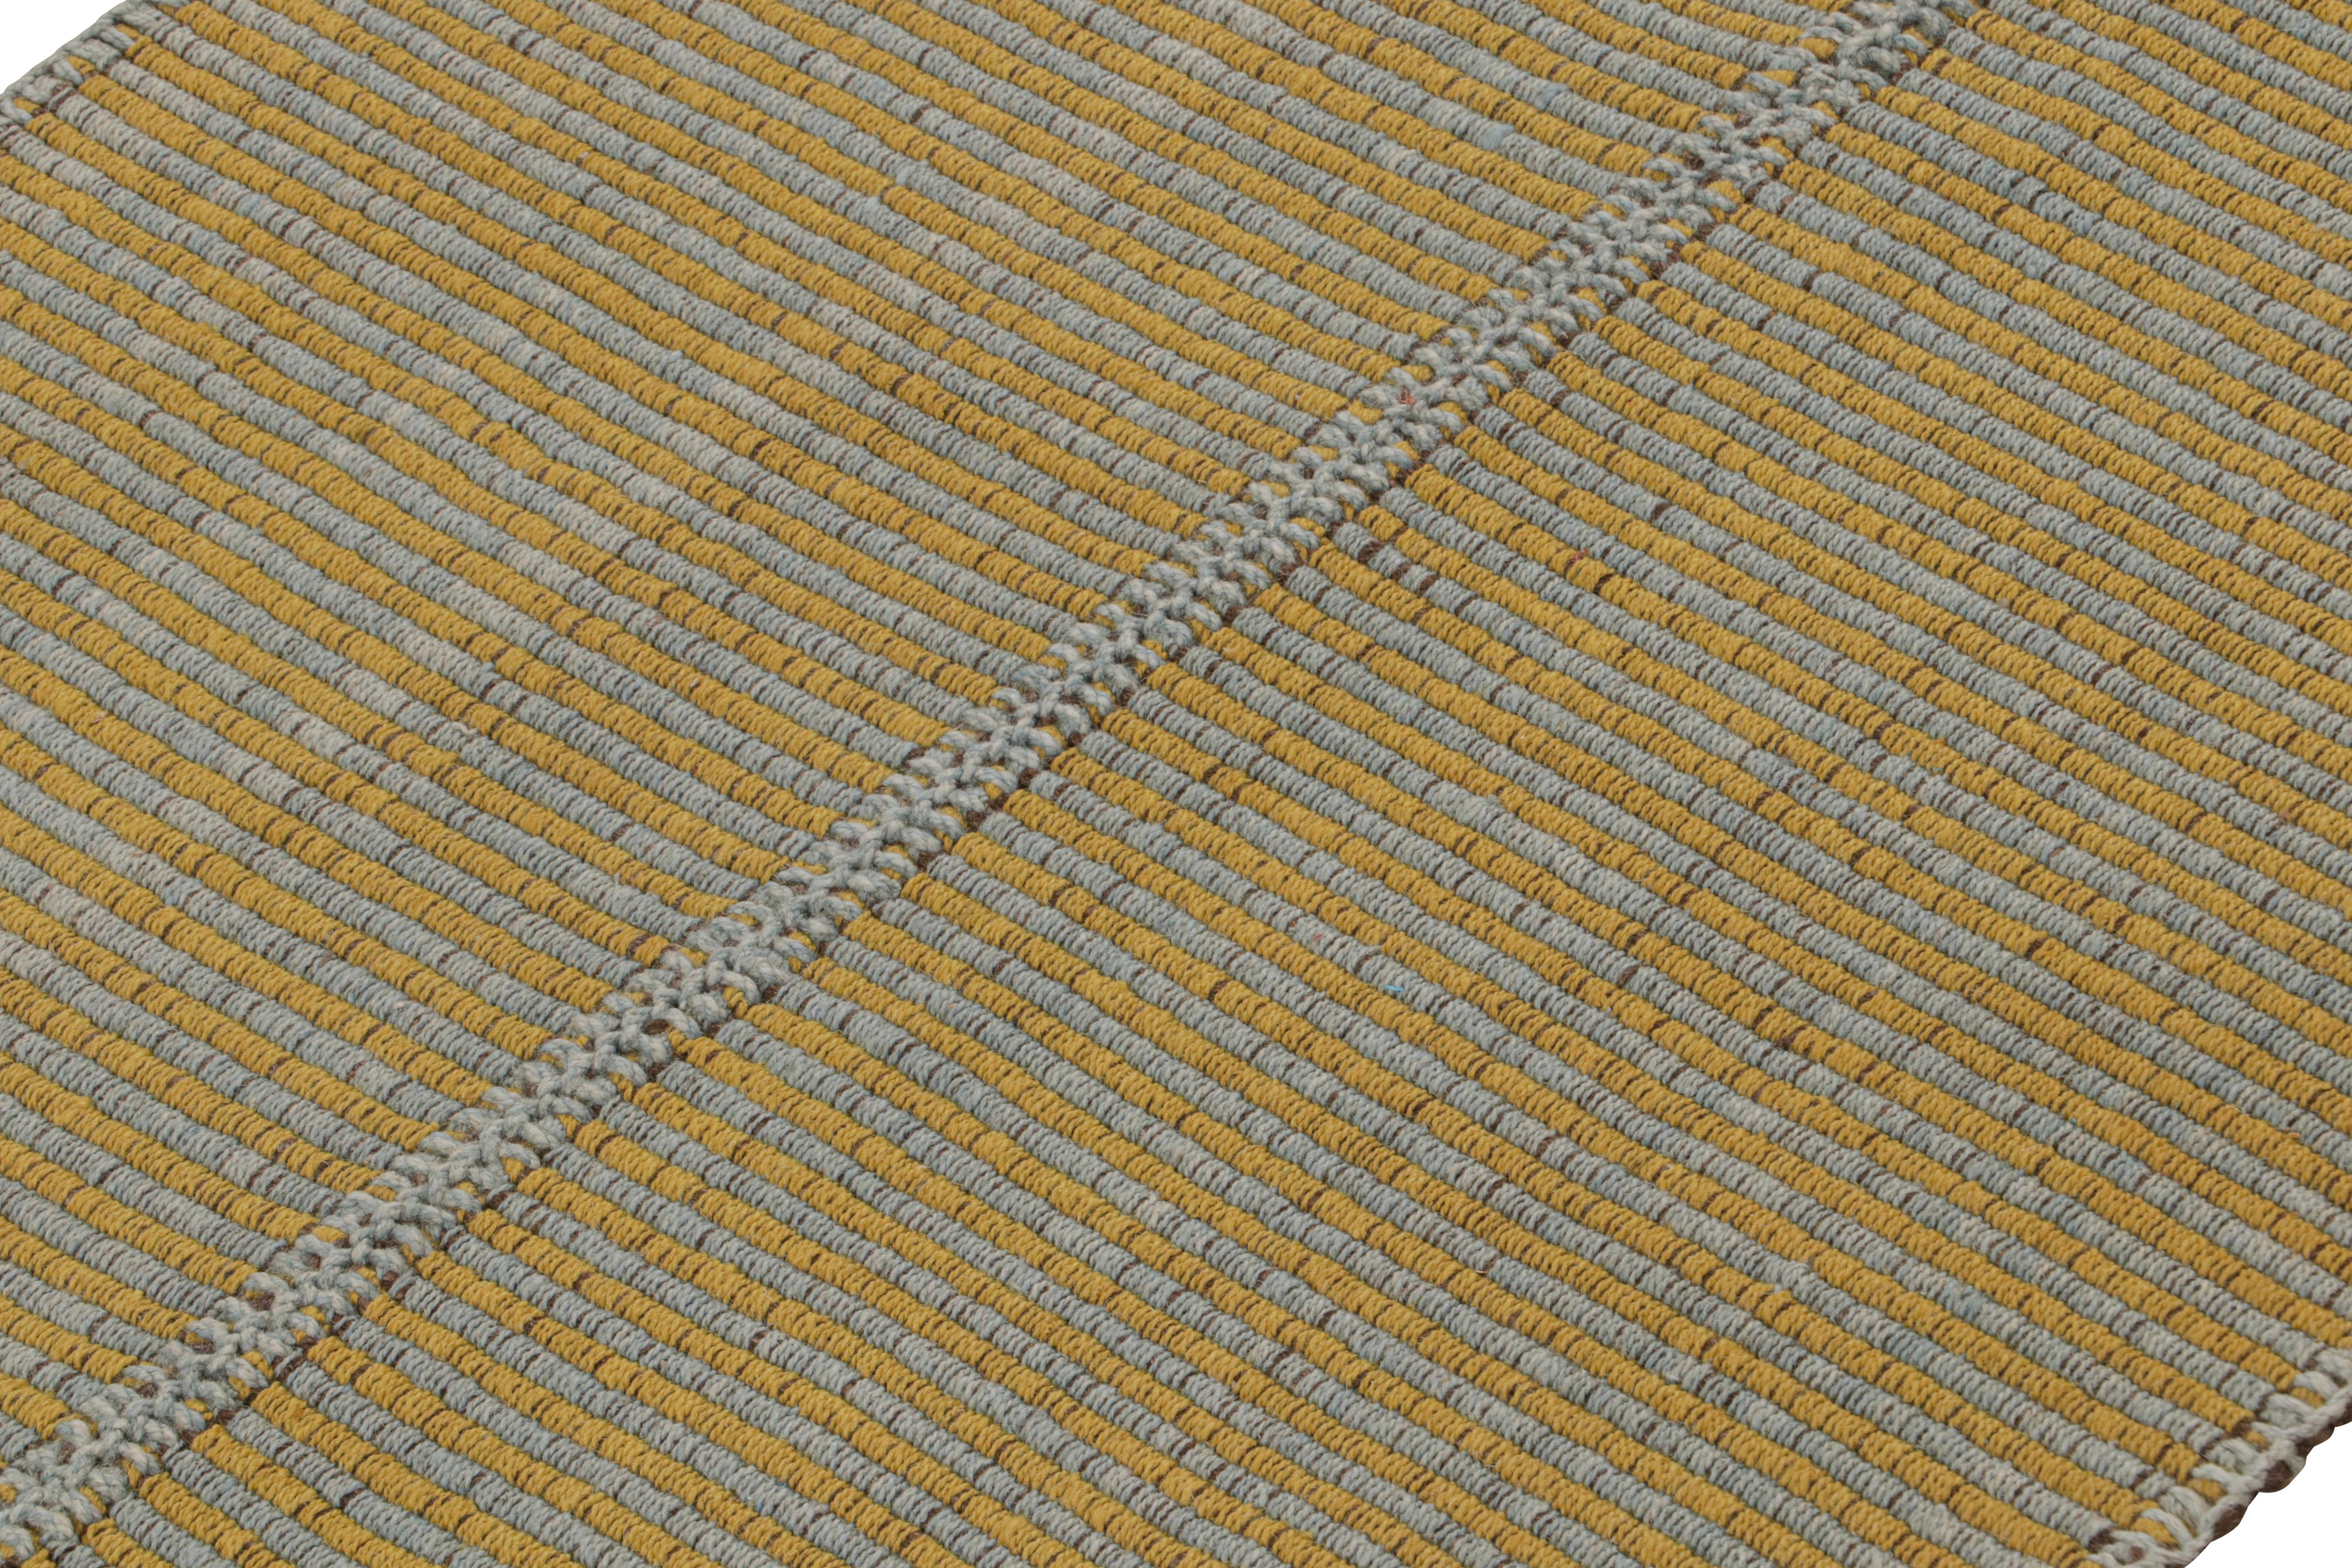 Handwoven in wool, this 3x3 square Kilim is from an inventive new contemporary flat weave collection by Rug & Kilim.

On the Design: 

Our “Rez Kilim” collection represents a unique modern take on classic Persian panel-weaving. This piece enjoys